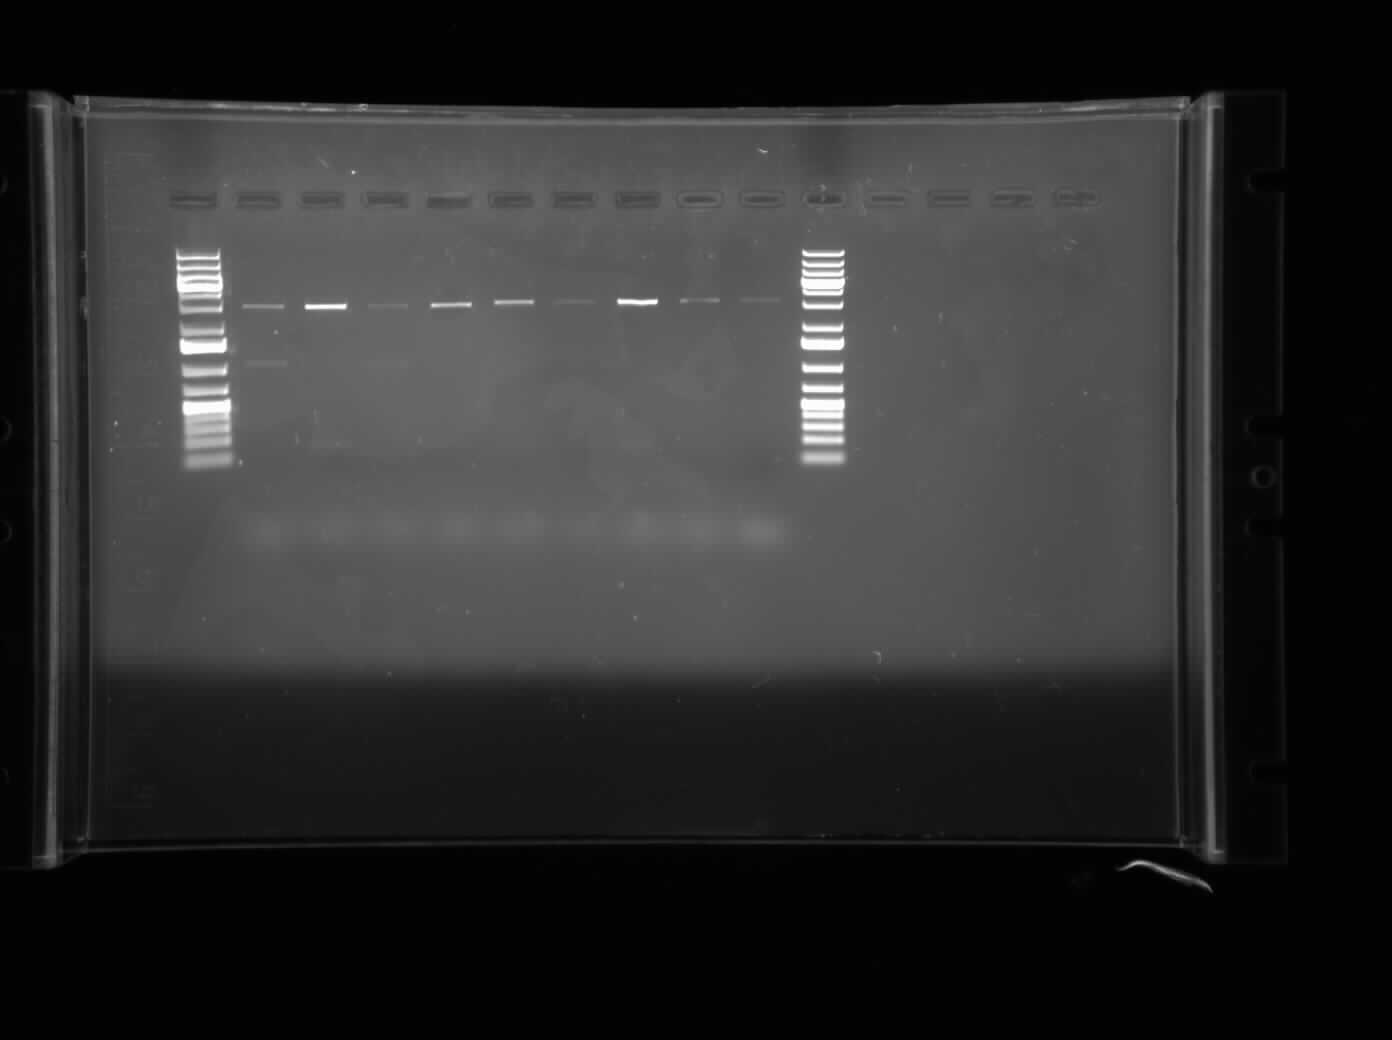 Chris's Agarose Gel Electrophoresis of the restriction digest of the CpxP promoter. The bands are very inconsistent. The digest was done with XbaI and PstI.